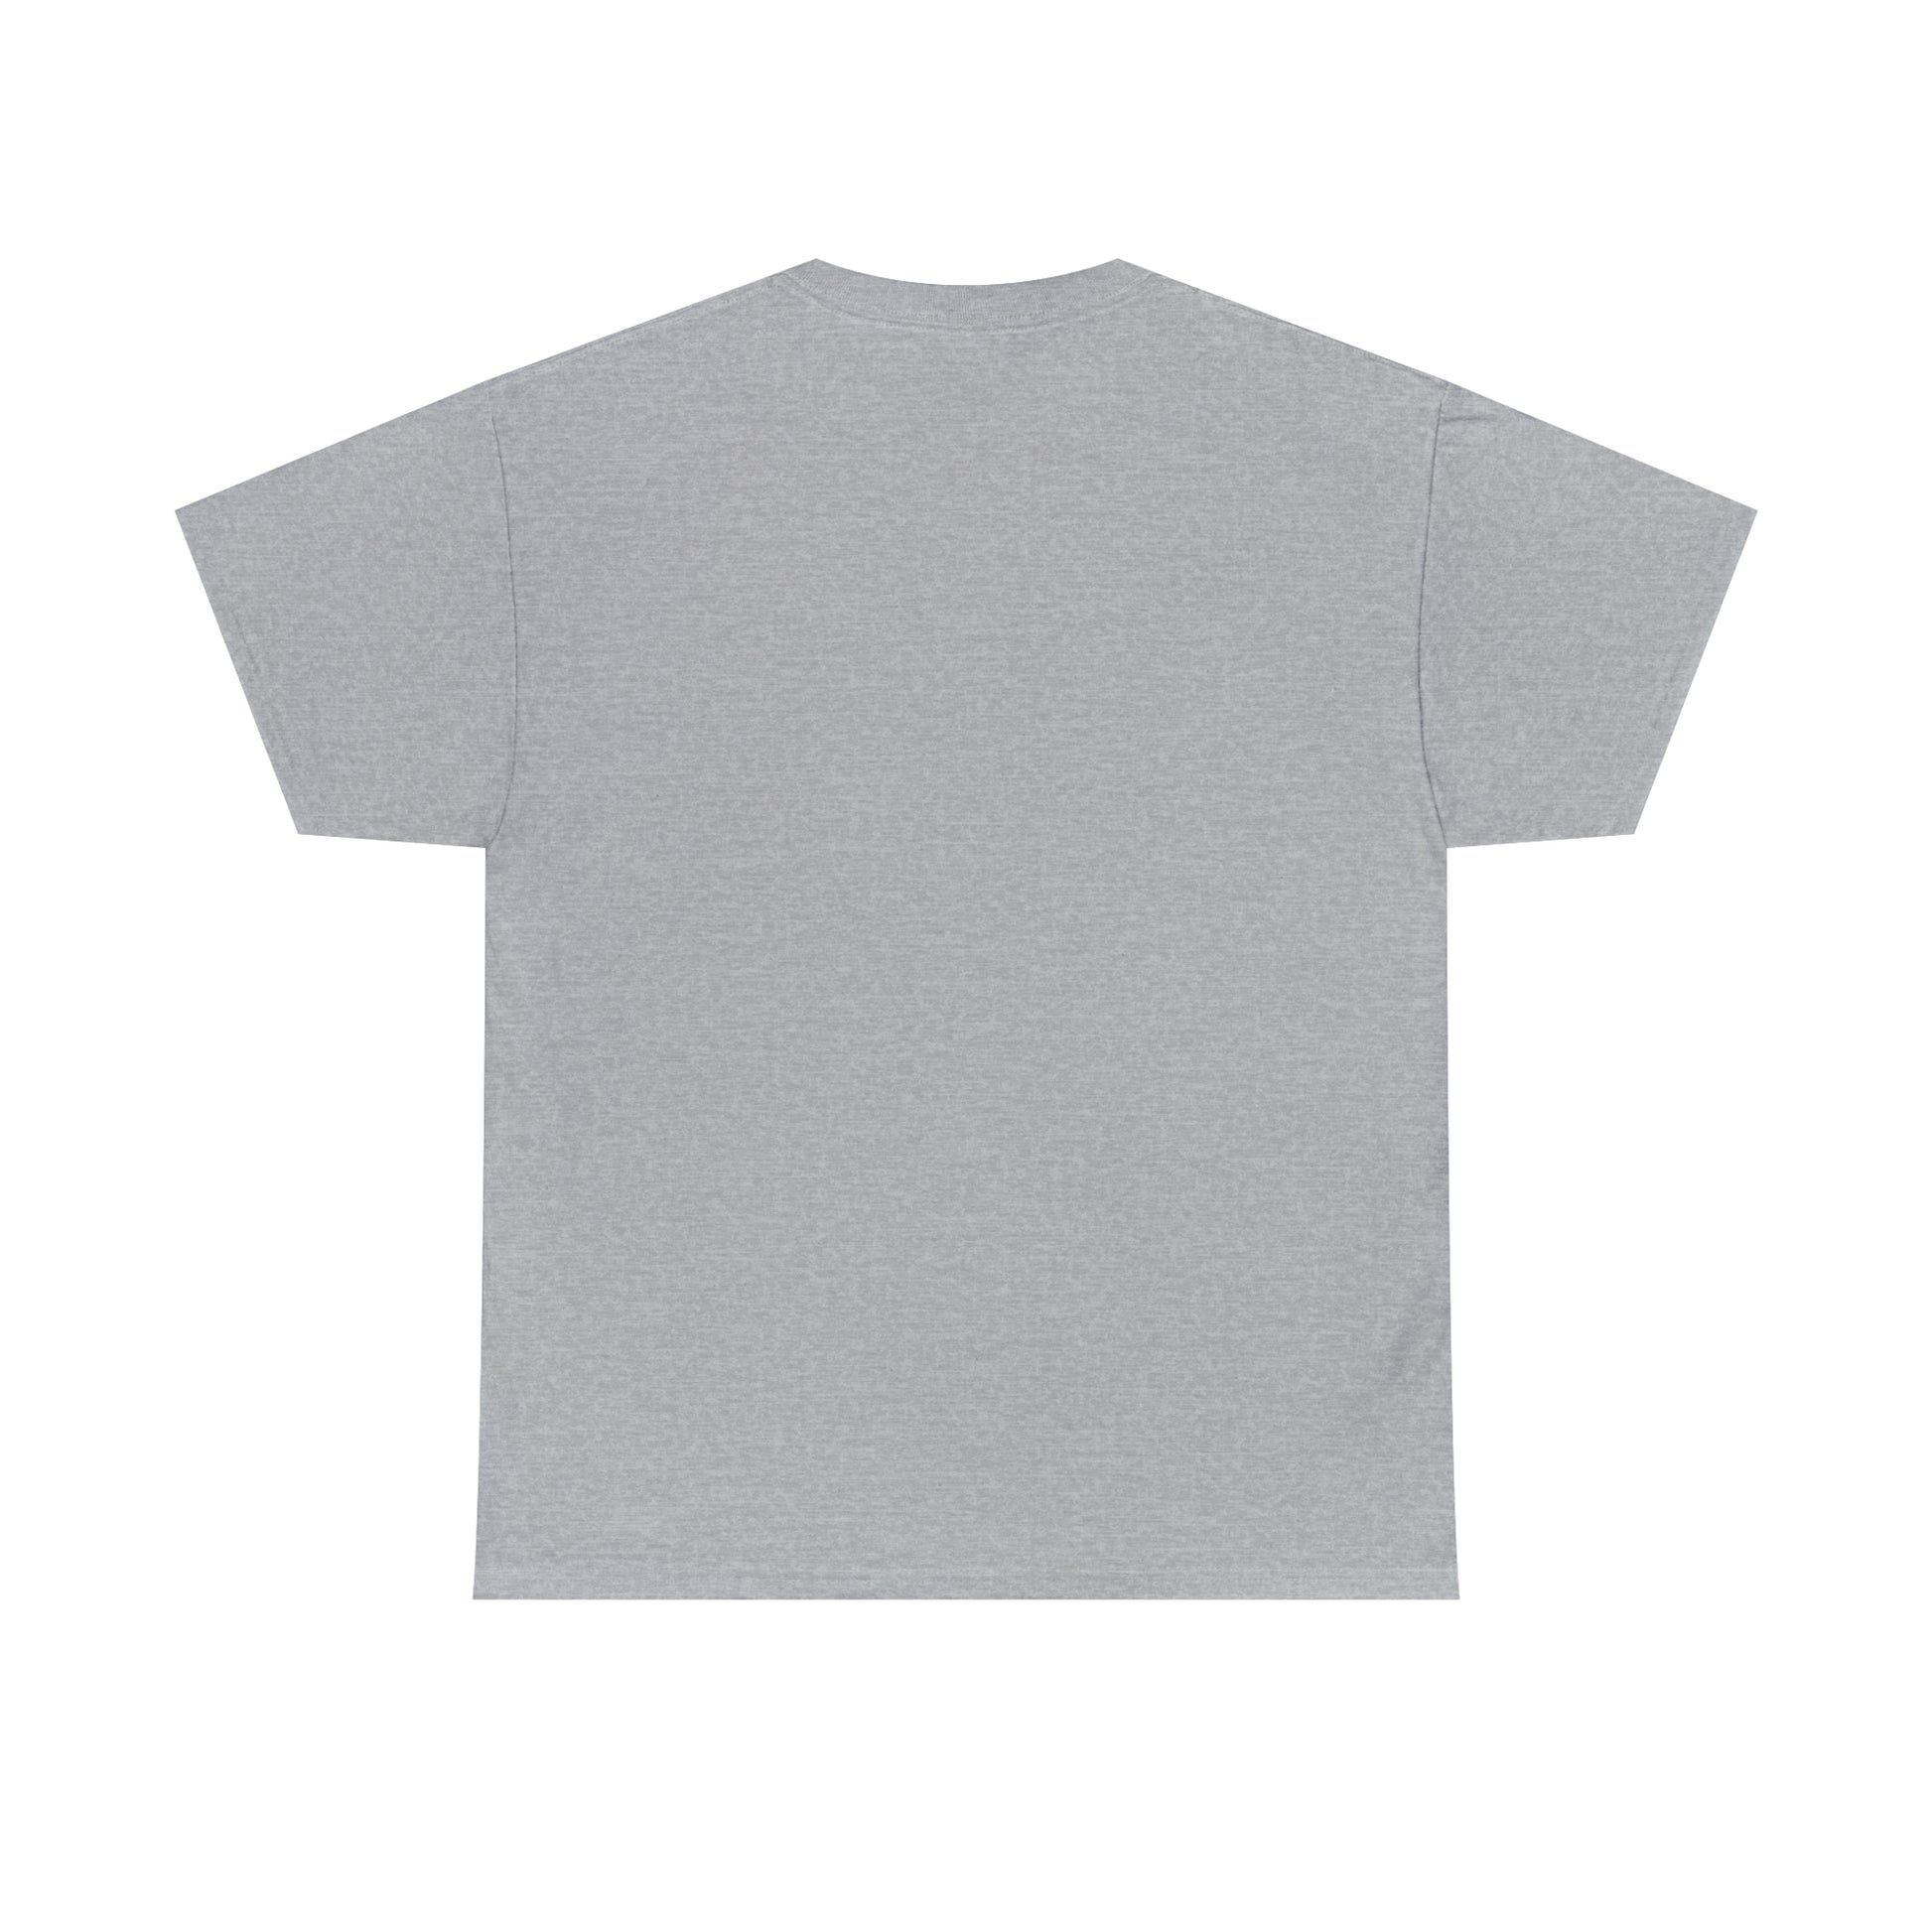 Flat back view of the Sport Grey t-shirt